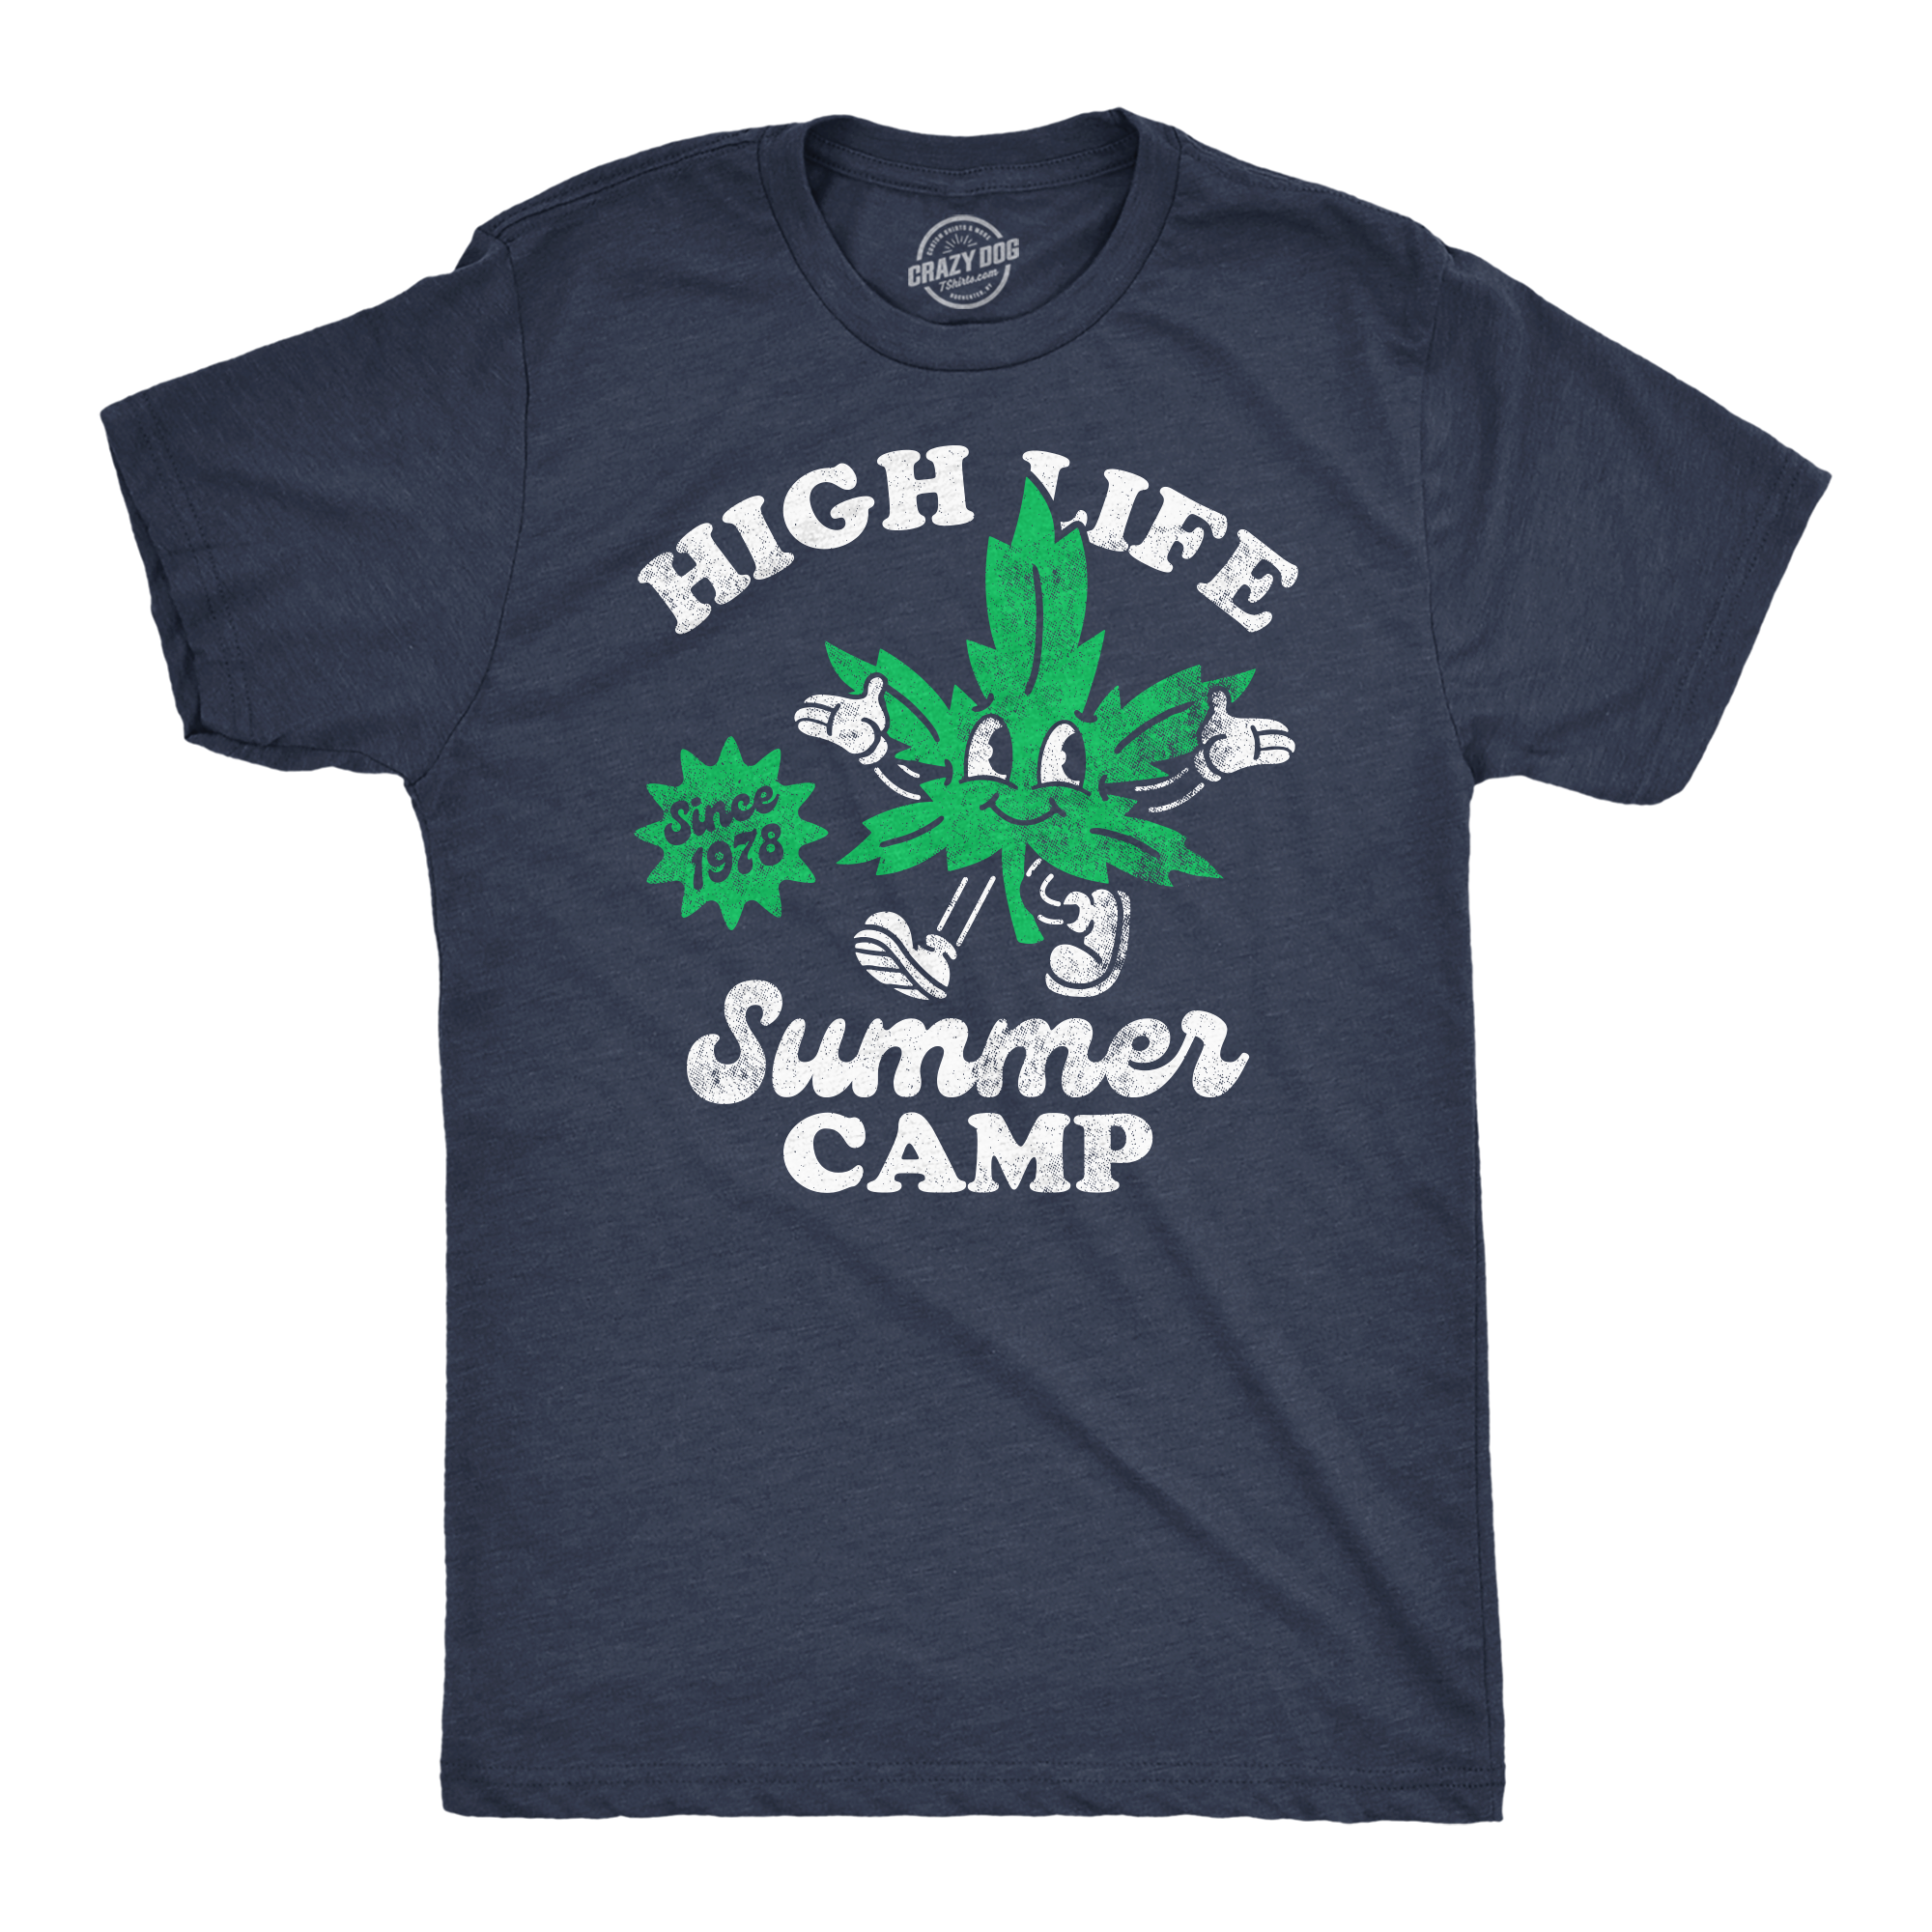 Funny Heather Navy - High Life Summer Camp High Life Summer Camp Mens T Shirt Nerdy 420 Camping sarcastic Tee